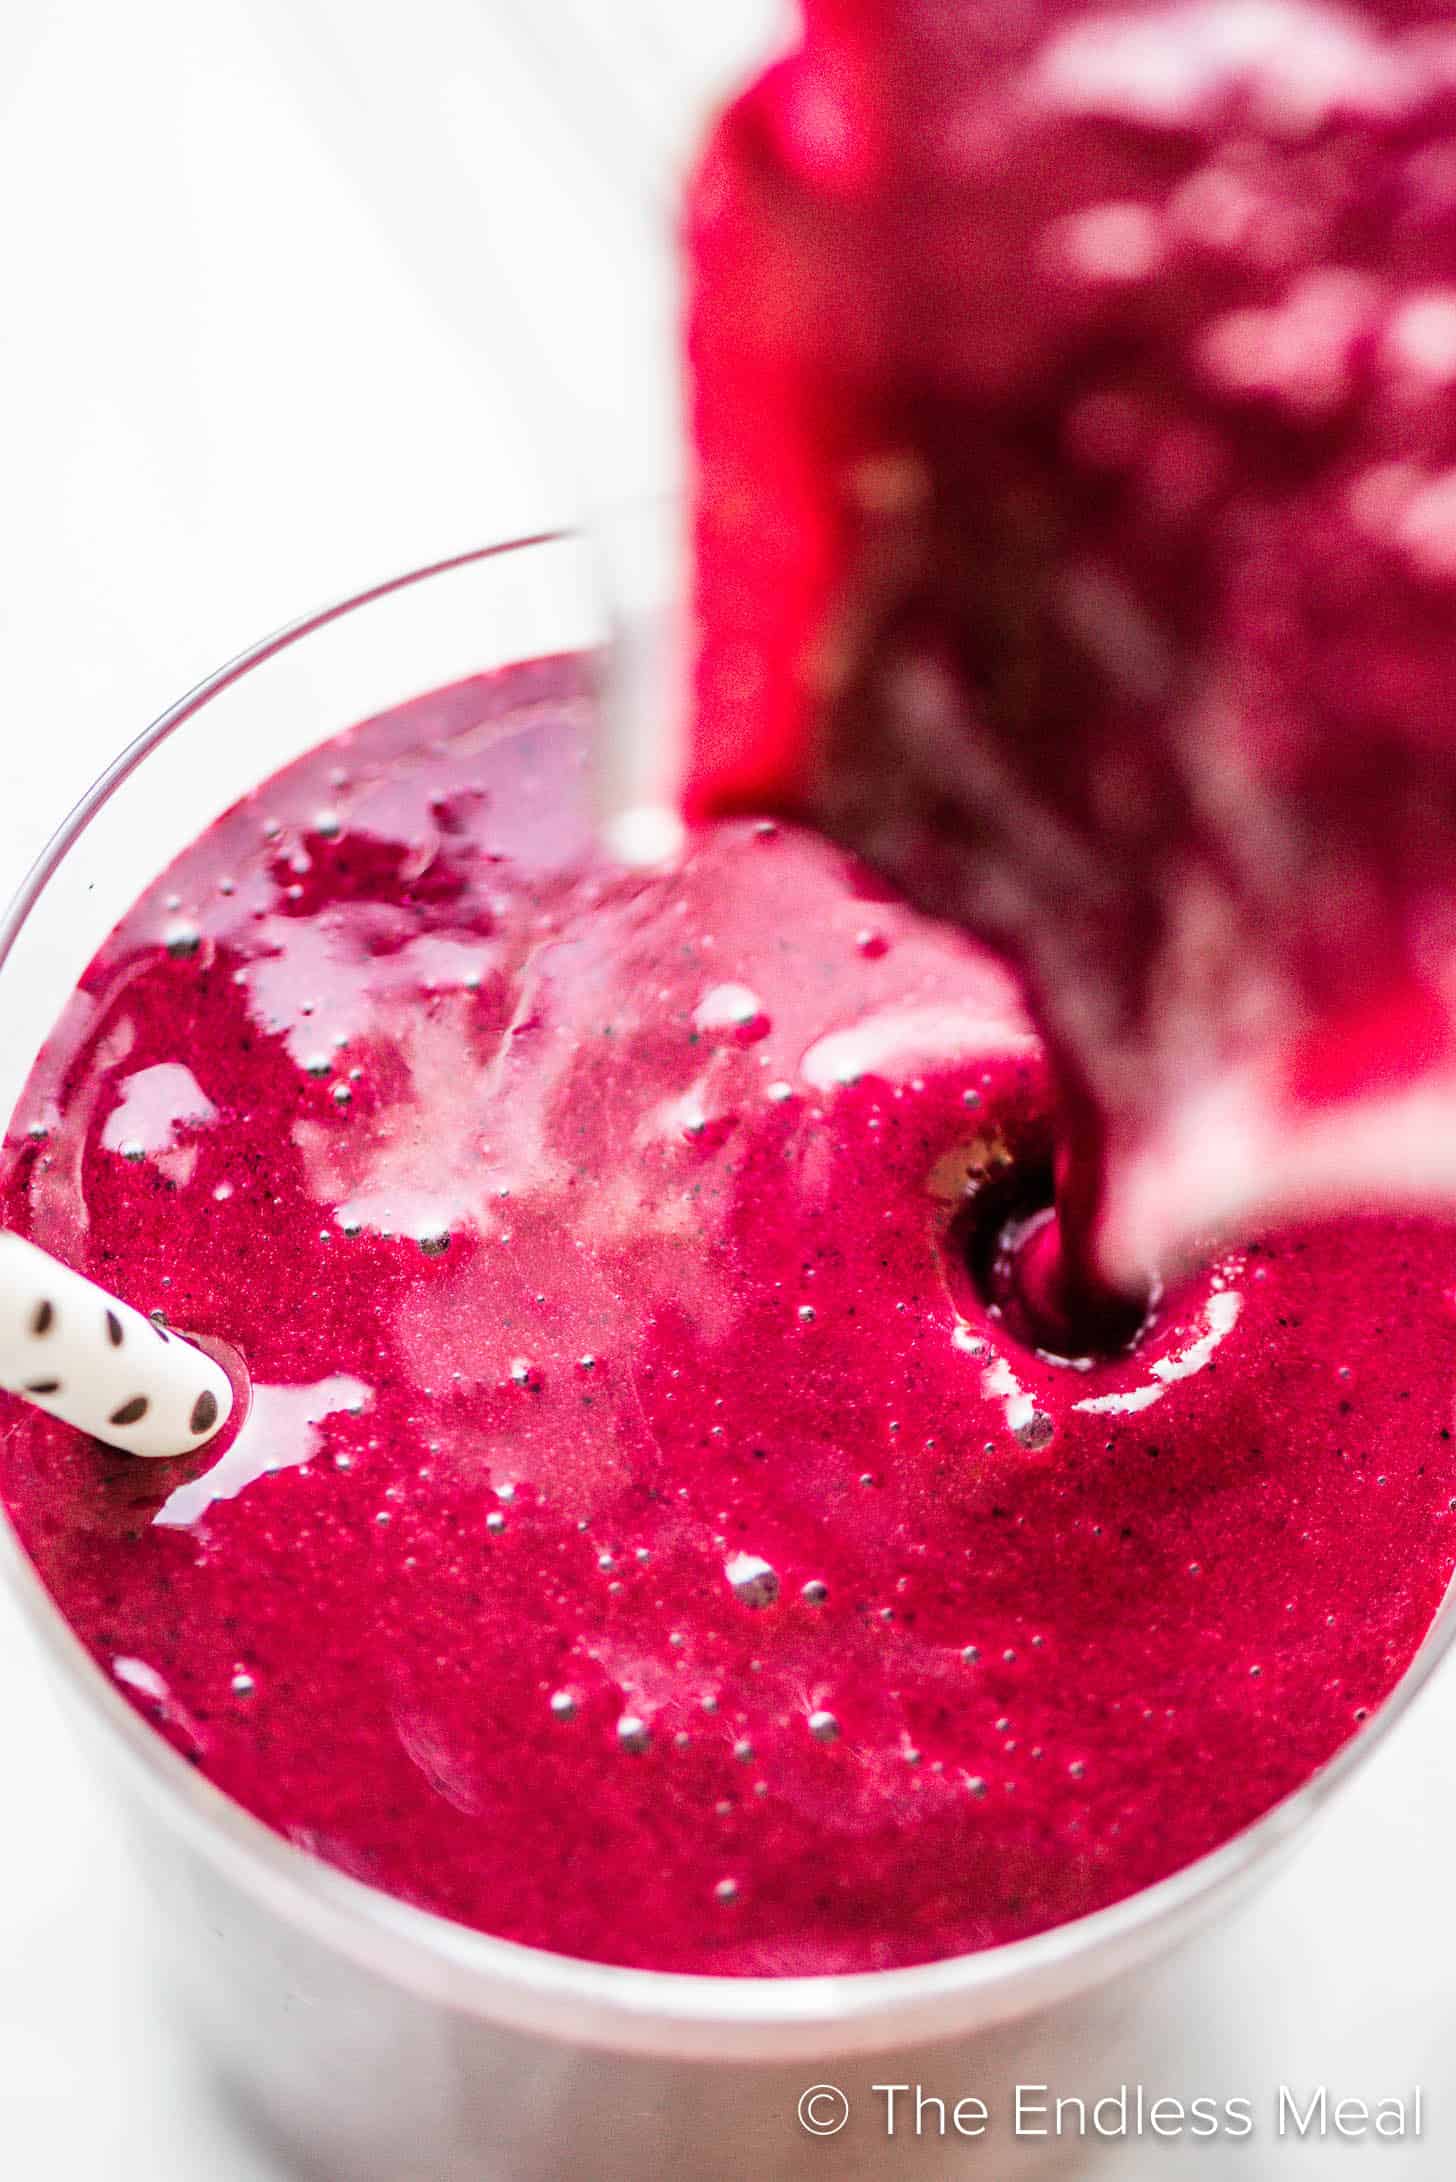 A Beet Smoothie being poured into a glass